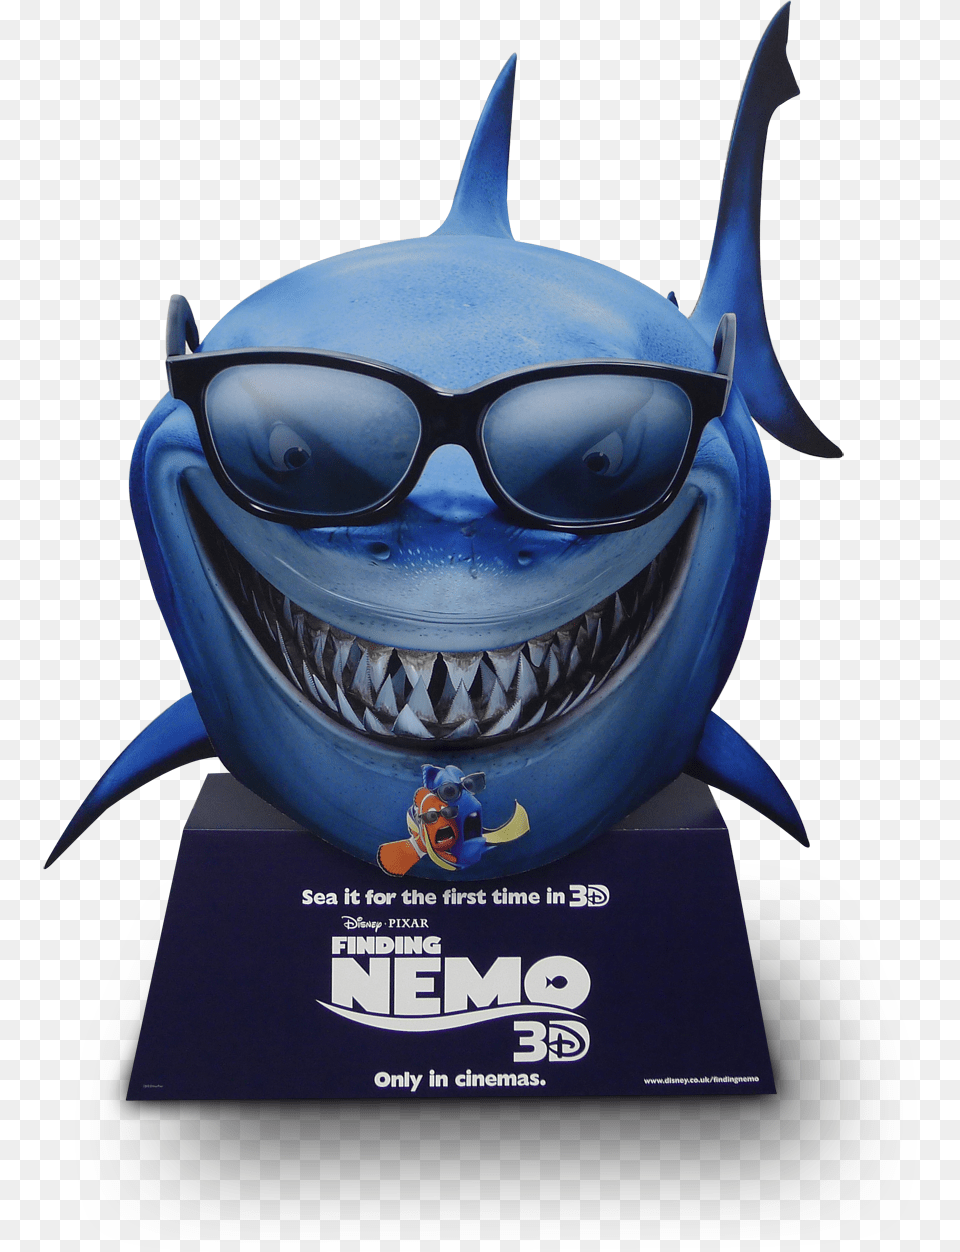 Front View The Body Of The Great White Shark Is Finding Nemo Poster 2003, Accessories, Sunglasses, Advertisement, Adult Free Png